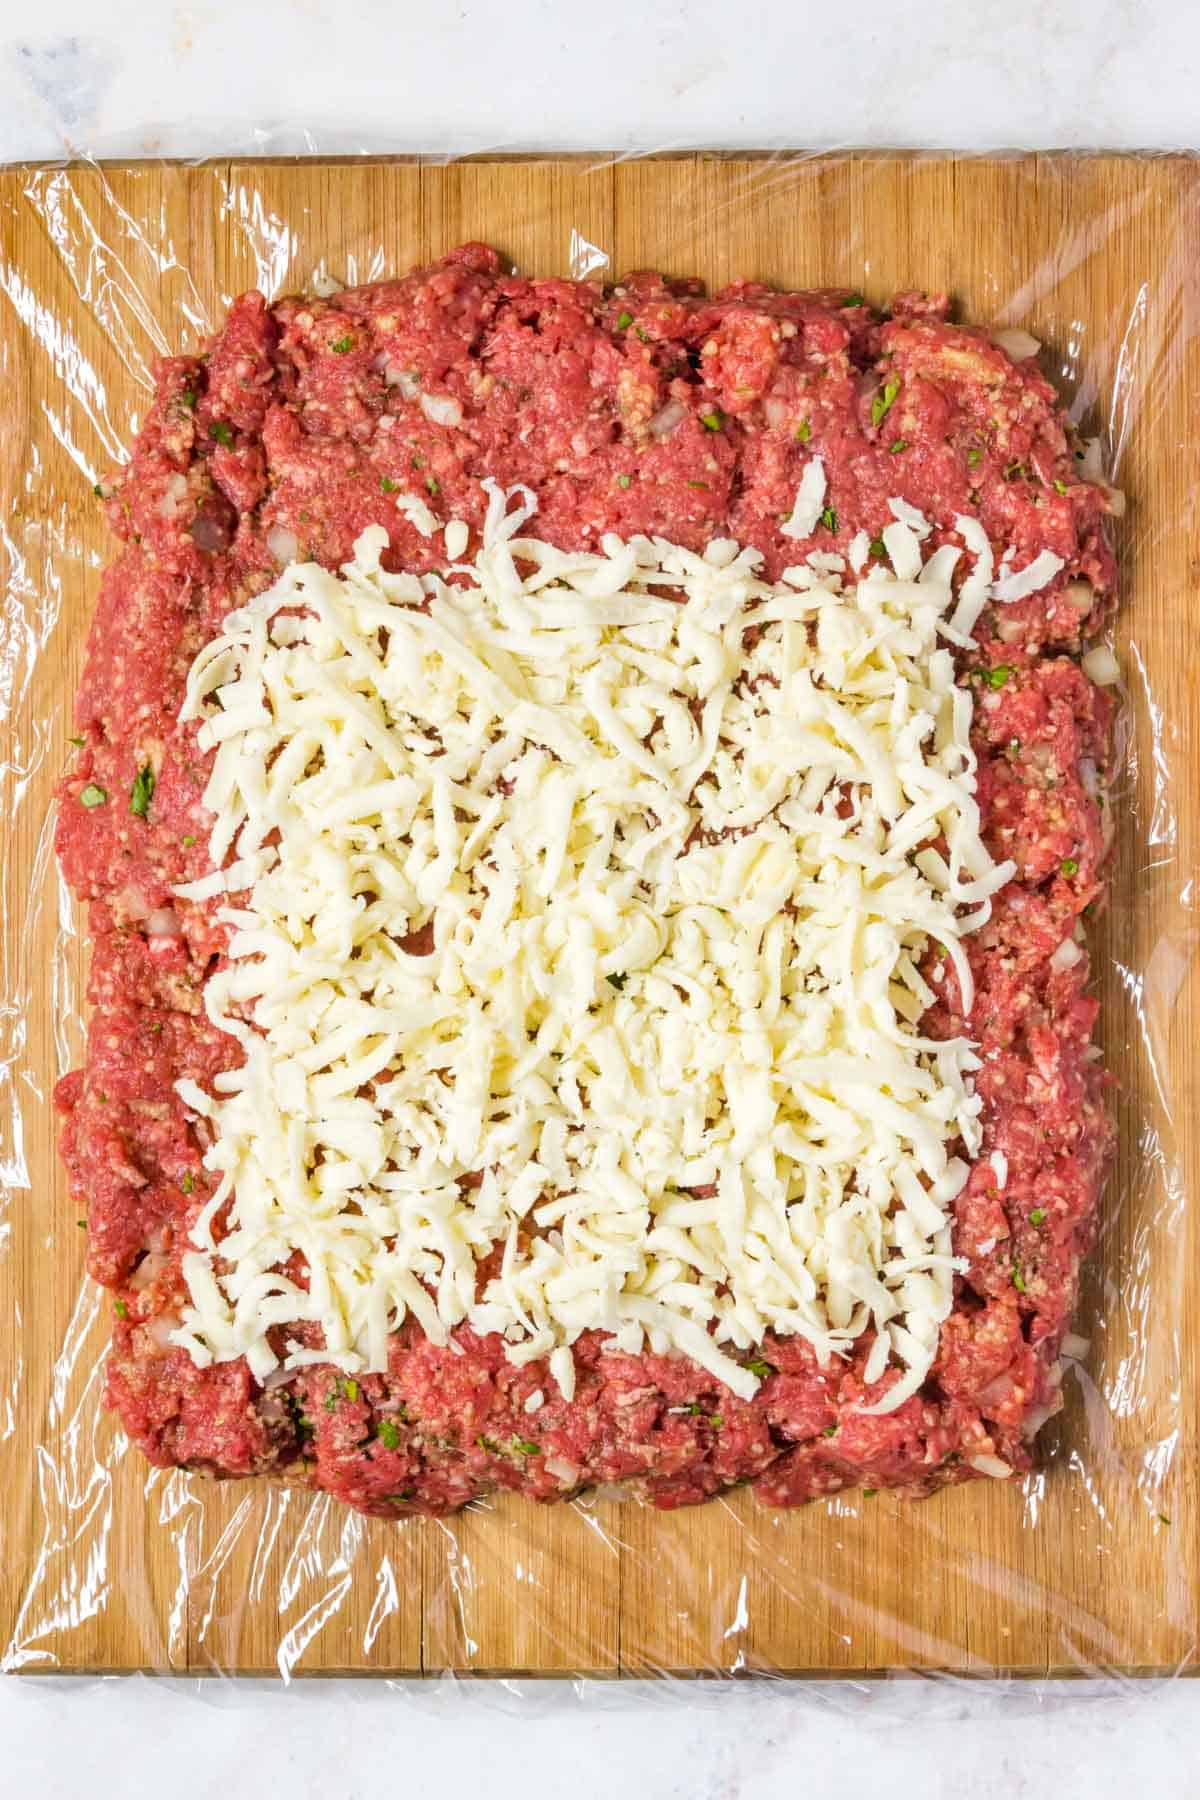 The beef mixture shaped into a rectangle with shredded parmesan cheese spread on top of it